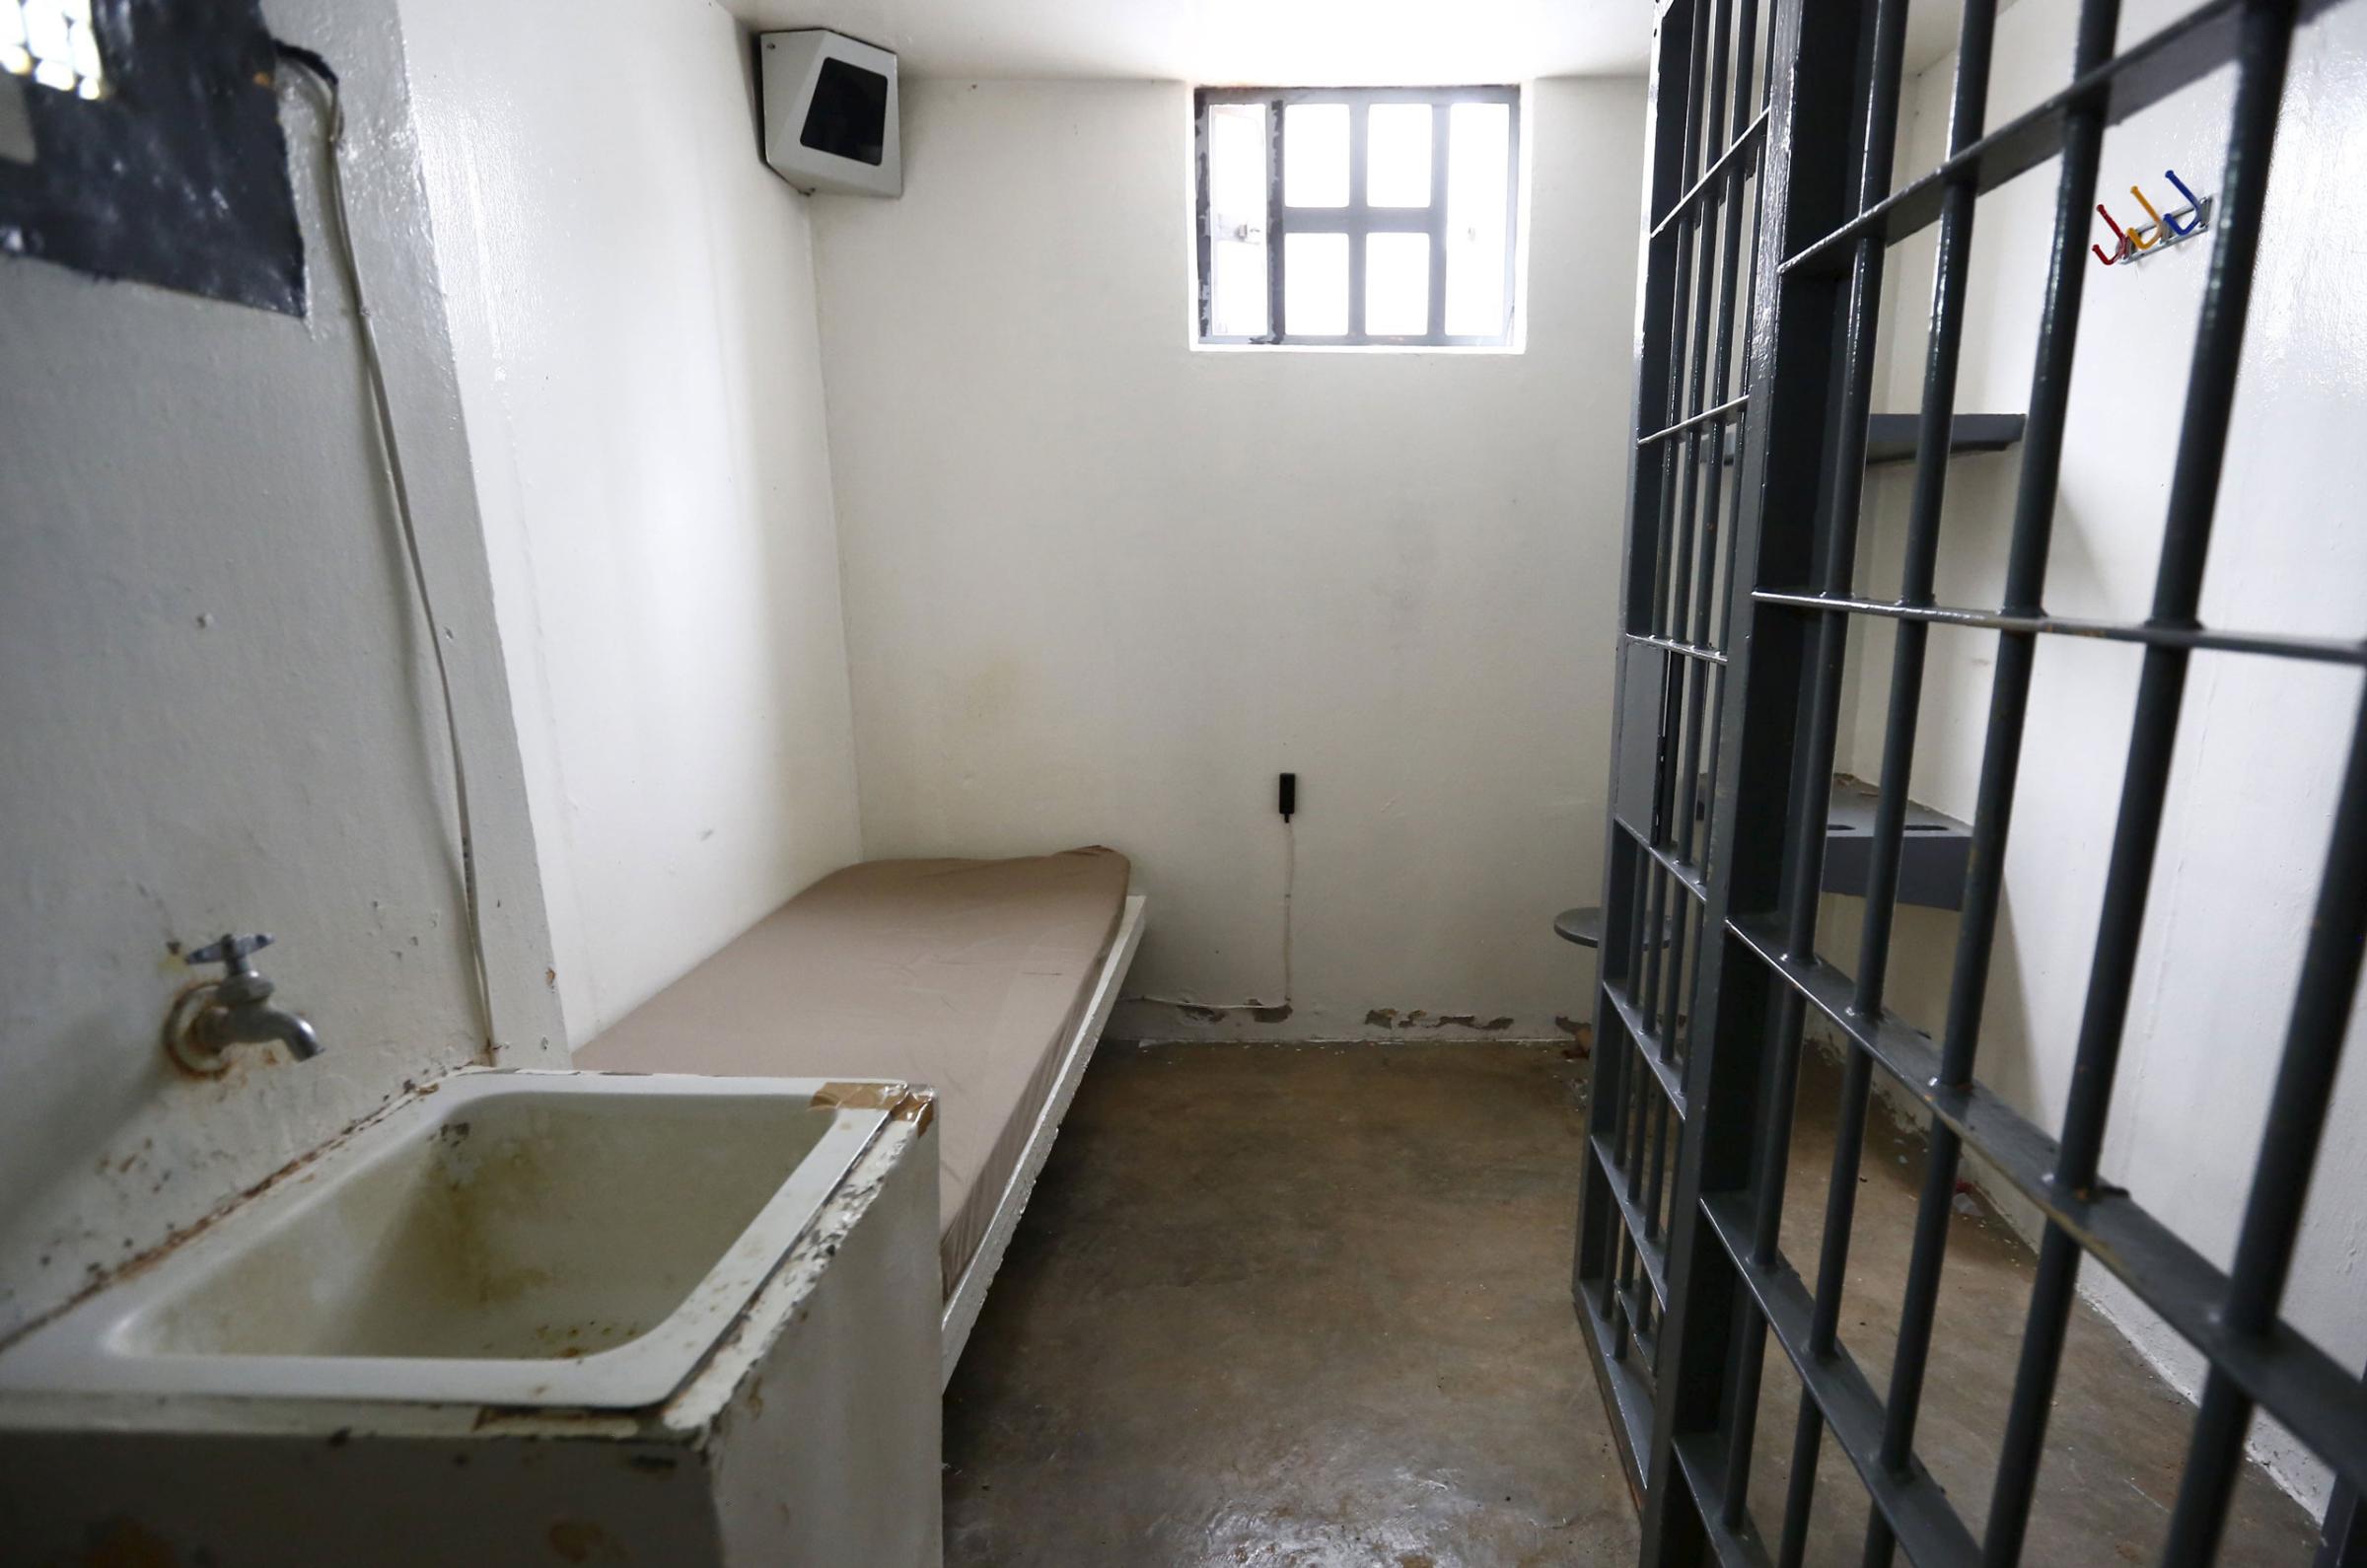 A view of drug lord Joaquin "El Chapo" Guzman's cell inside the Altiplano Federal Penitentiary, where he escaped from, in Almoloya de Juarez, on the outskirts of Mexico City, July 15, 2015. U.S. law enforcement officials met with agents of the Mexican attorney general's office this week to share information related to the escape from prison of Guzman and coordinate efforts to apprehend him, a Mexican government official said on Wednesday. REUTERS/Edgard Garrido